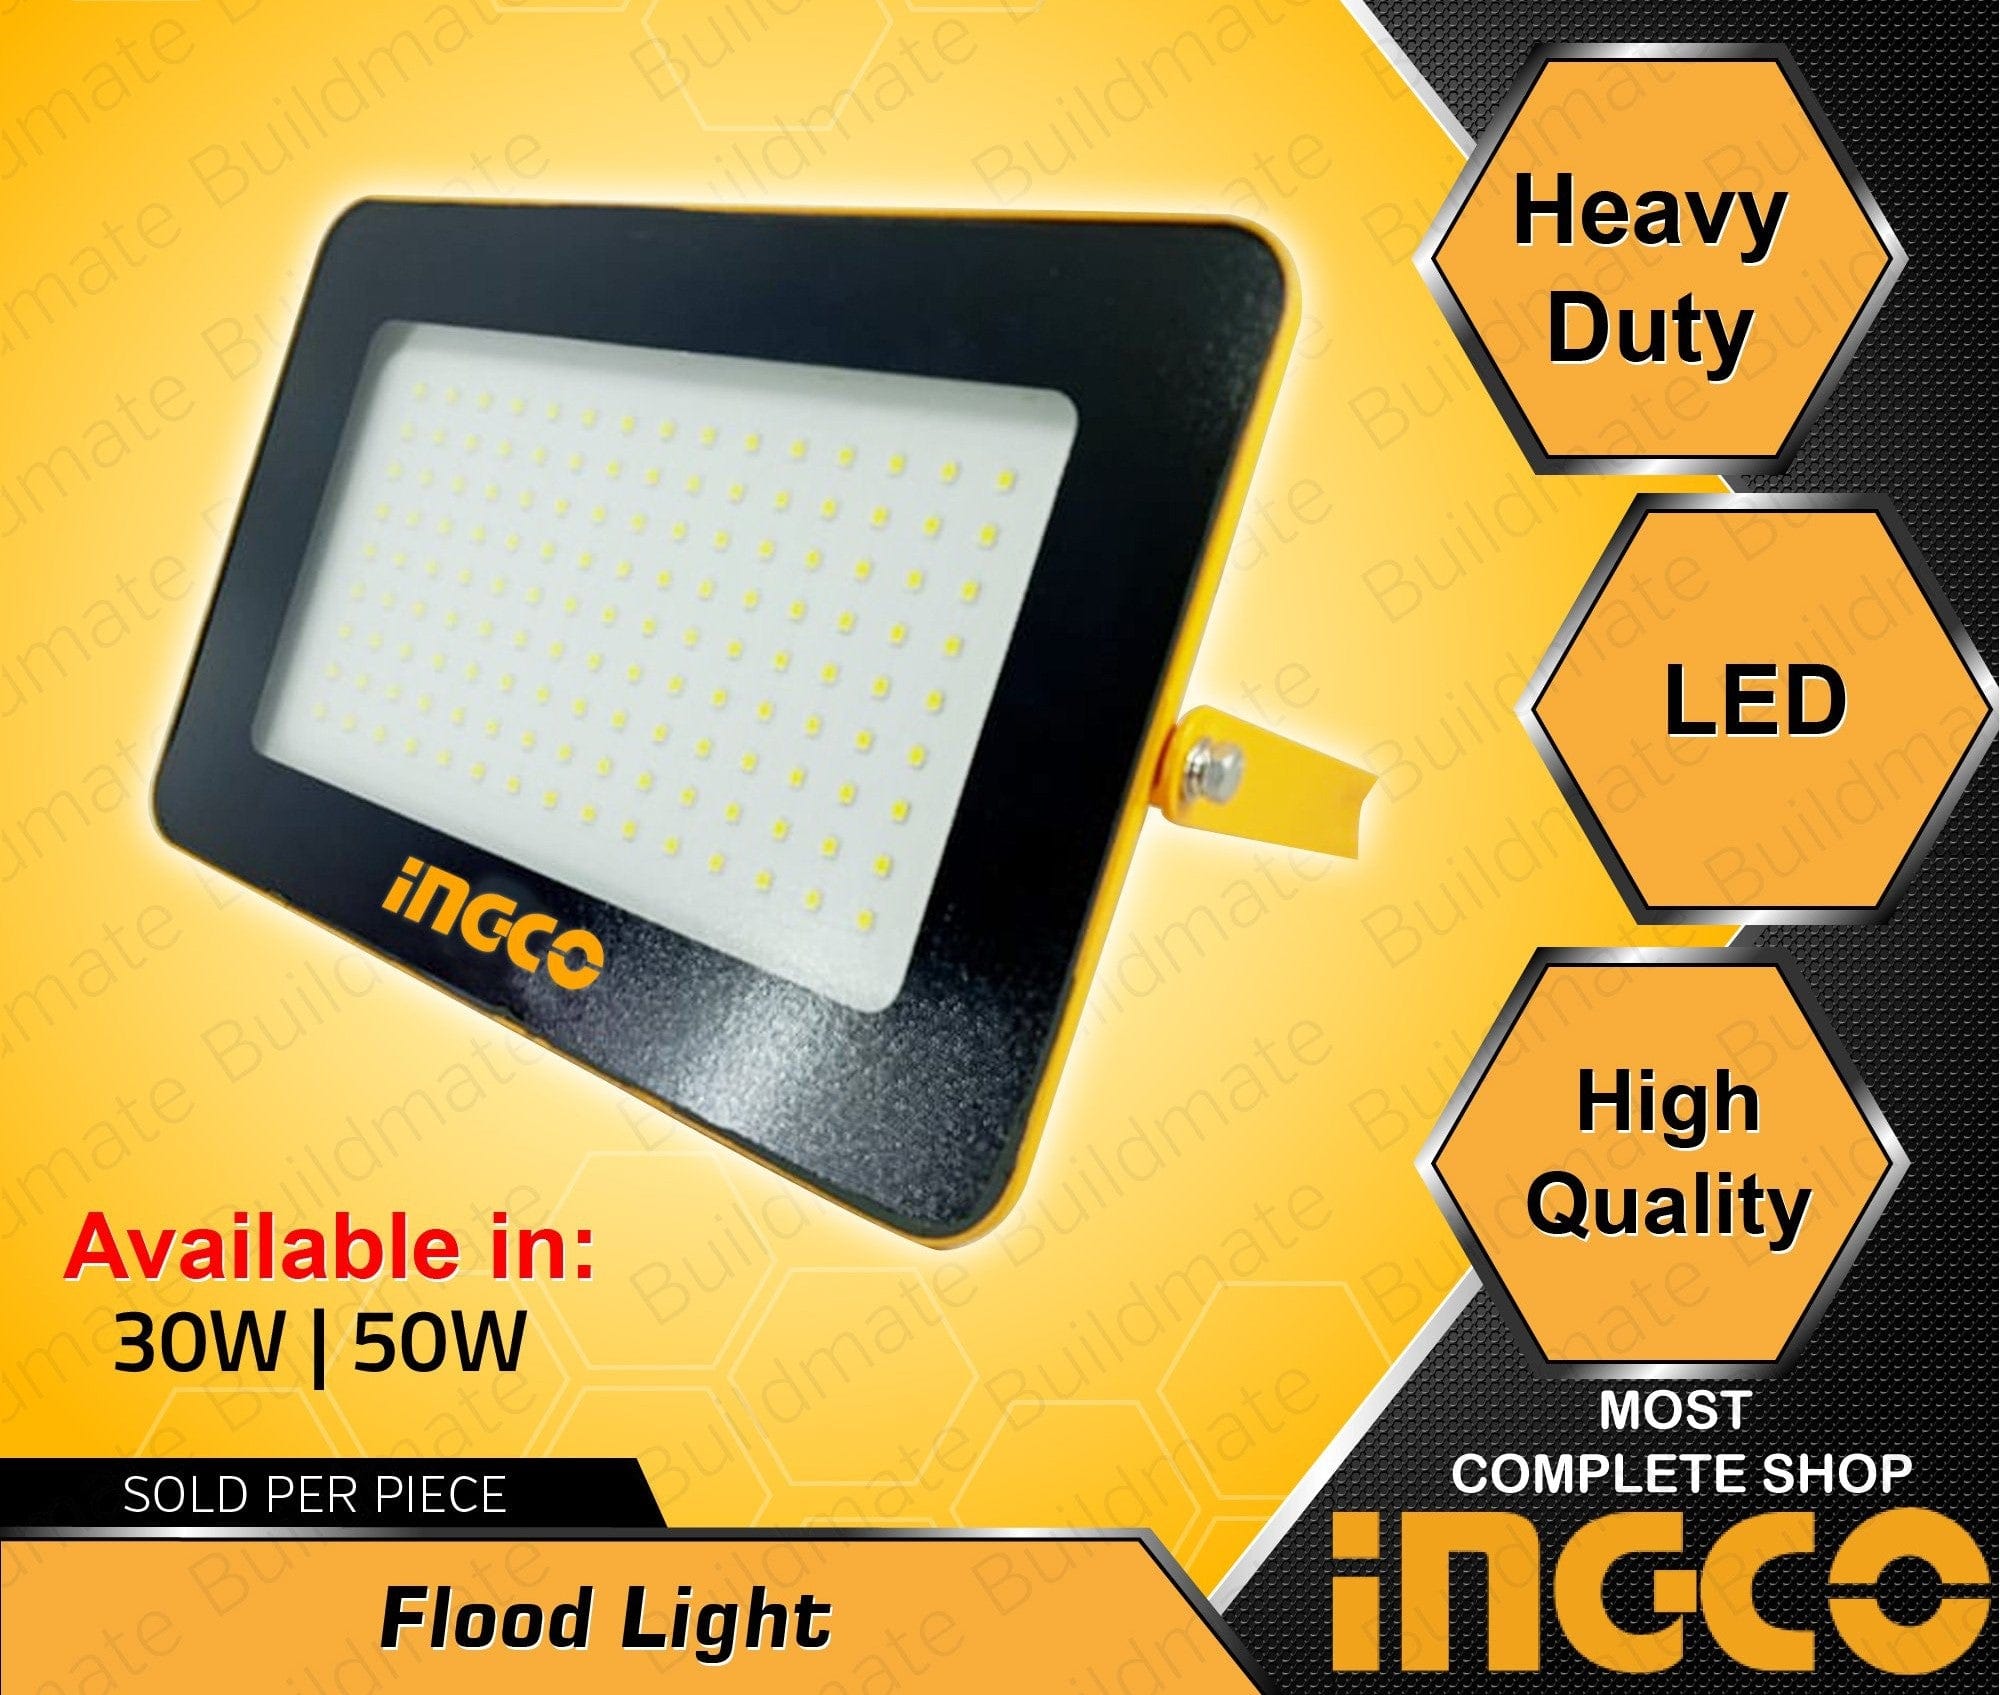 Ingco LED Floodlights 30W & 50W - HLFL3301 & HLFL3501 | Shop Online in Accra, Ghana - Supply Master Specialty Safety Equipment Buy Tools hardware Building materials